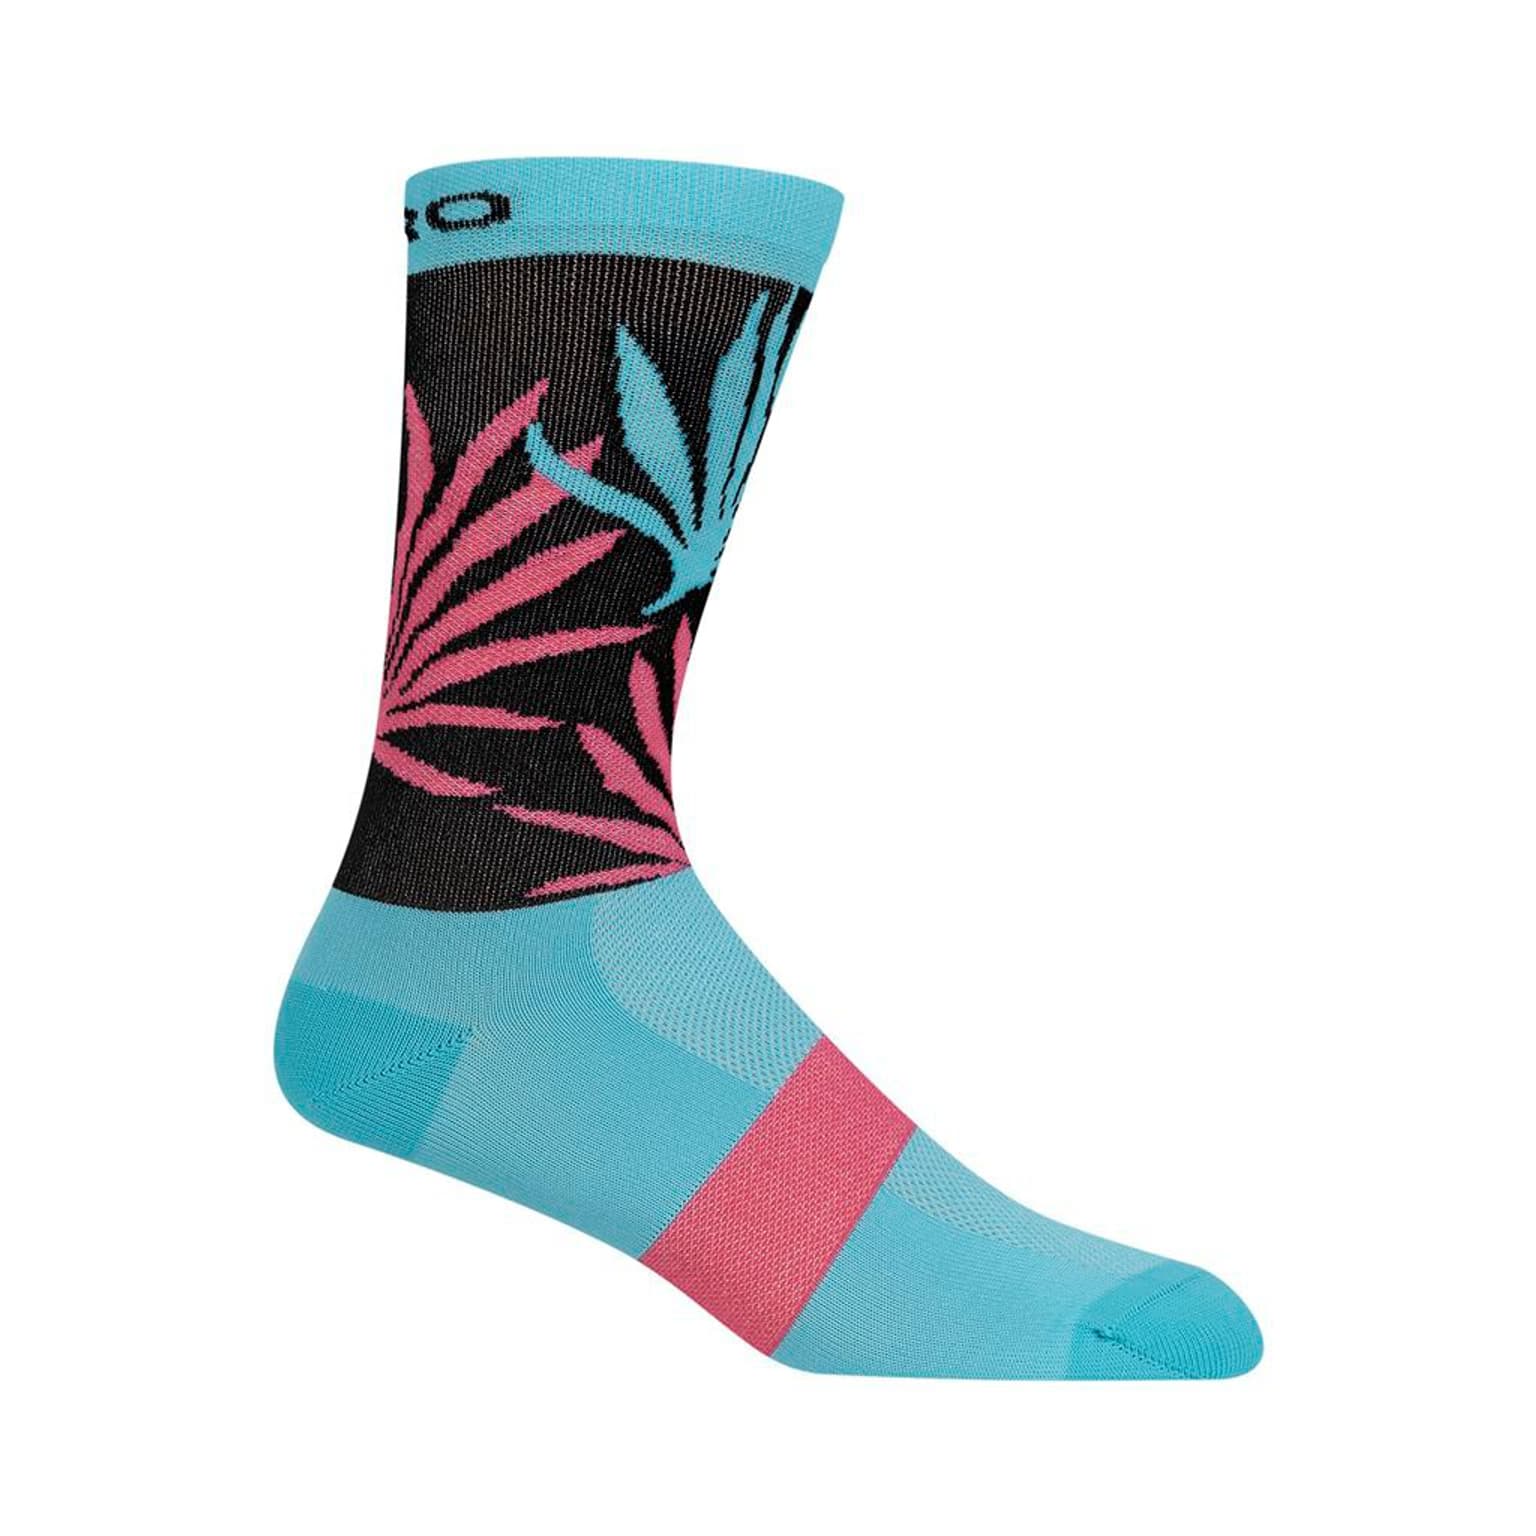 Giro Giro Comp Racer High Rise Sock Chaussettes turquoise-claire 1